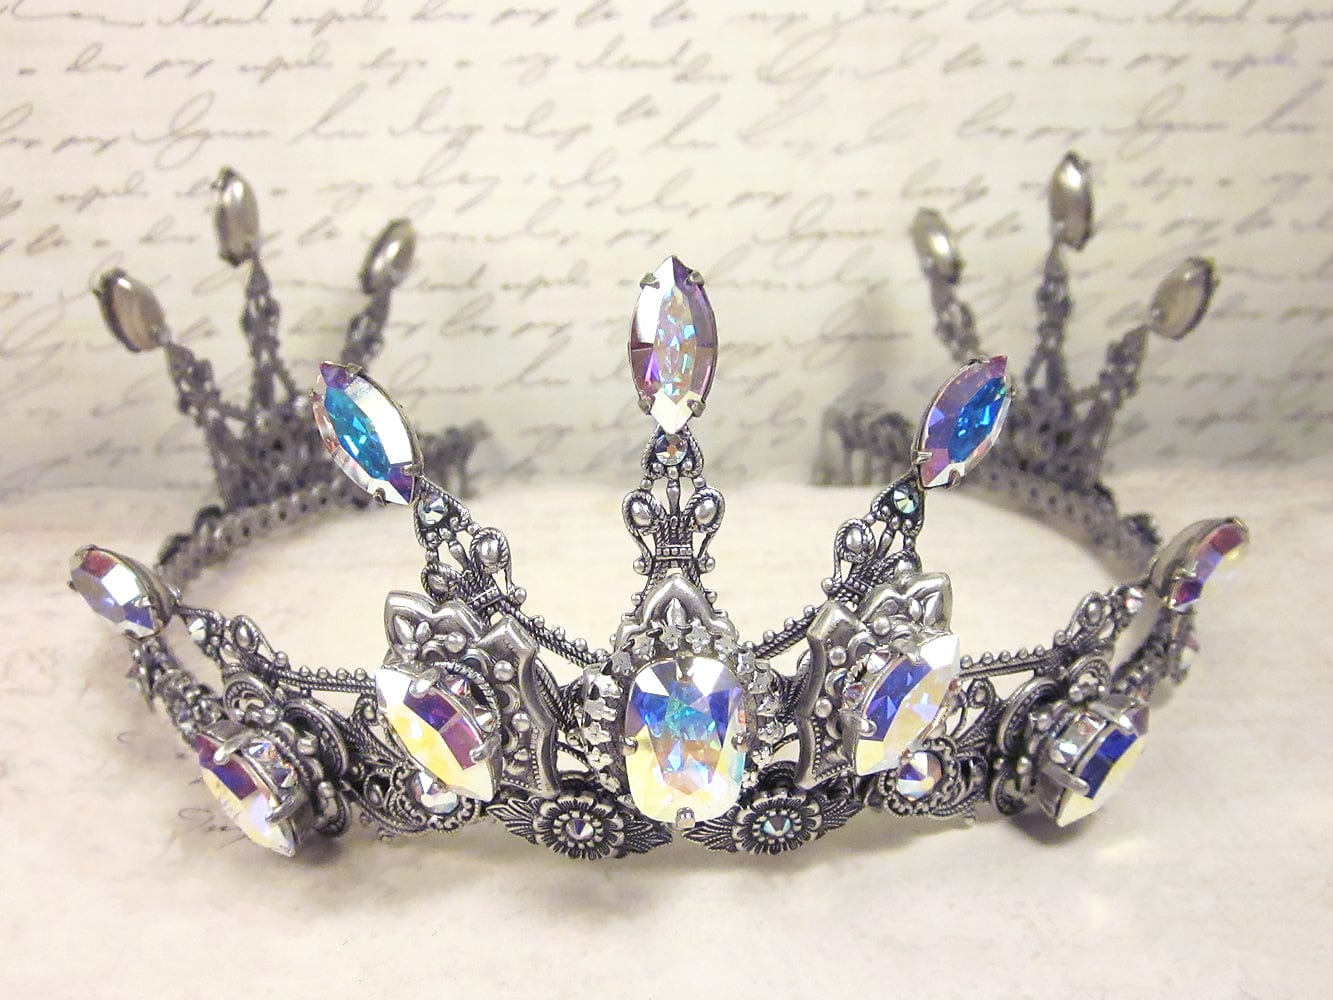 Avalon Crystal Tiara in Antiqued Silver by Rabbitwood and Reason. Stones featured: Crystal AB